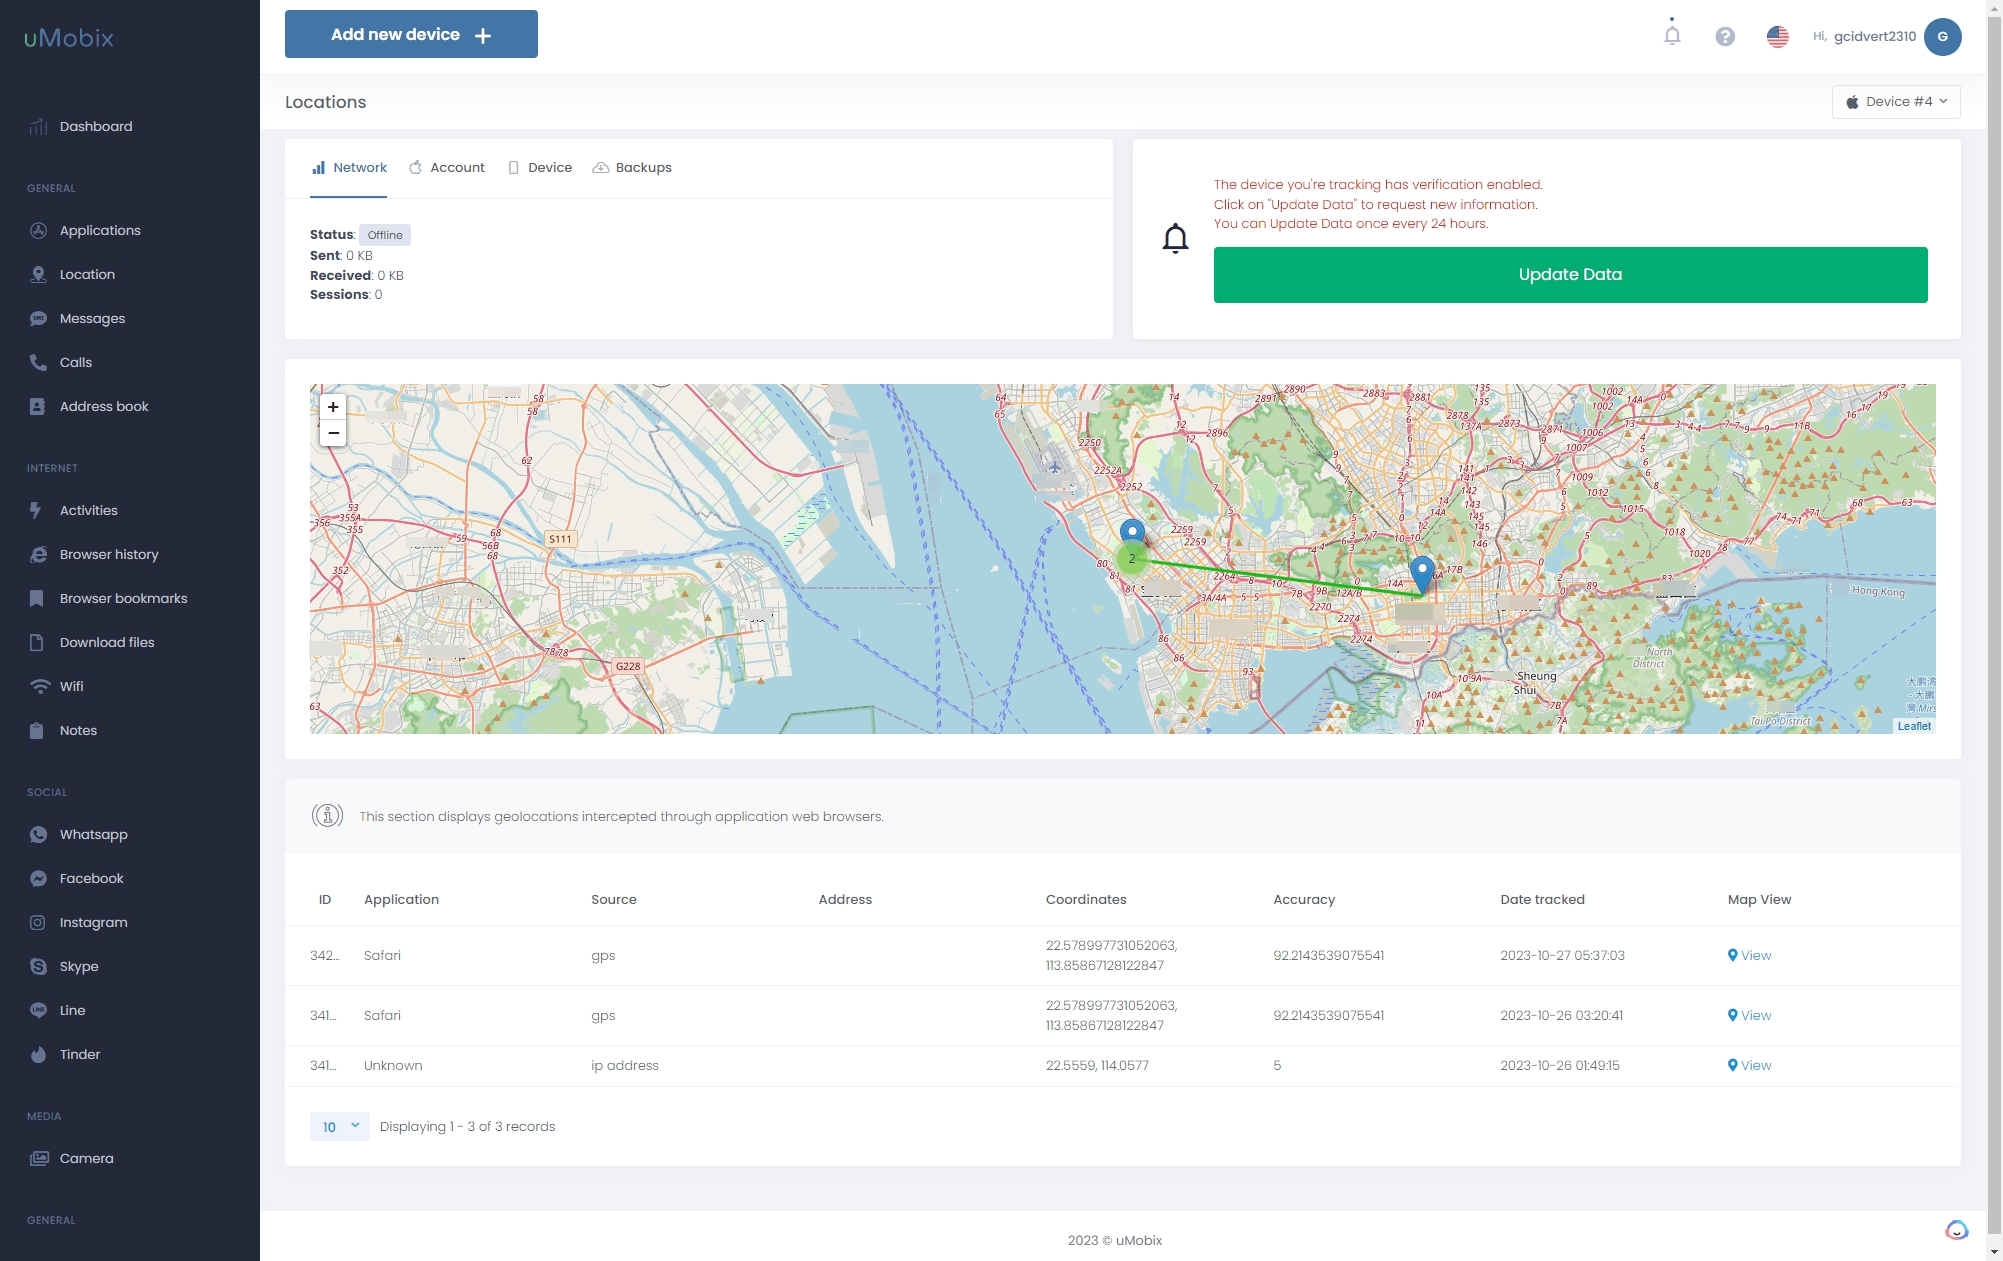 Screenshot of real data from Locations